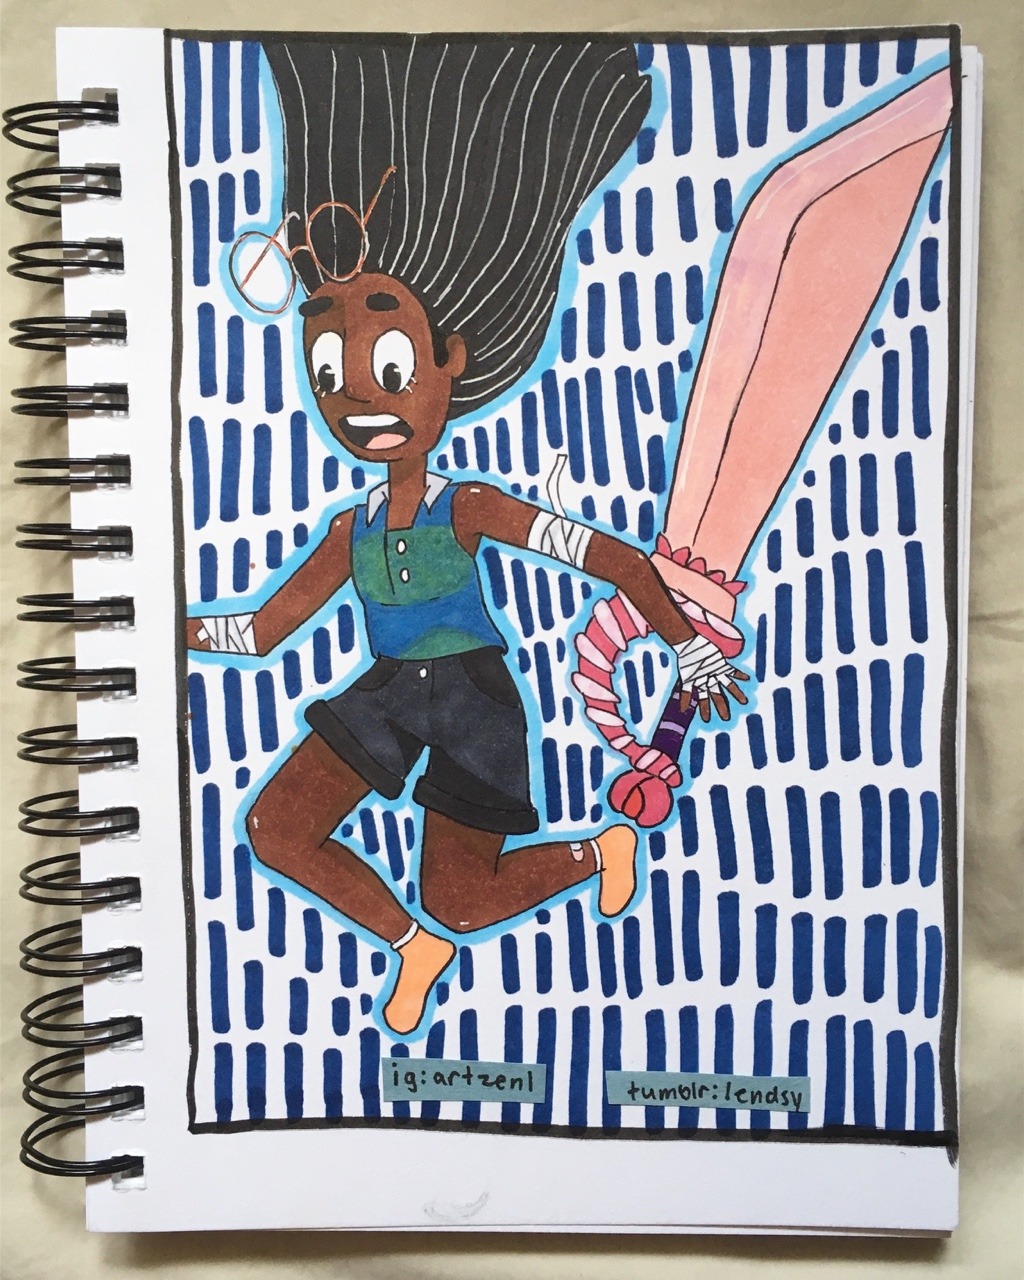 I drew Connie. At first it was a sketch and it actually turned into something I really like